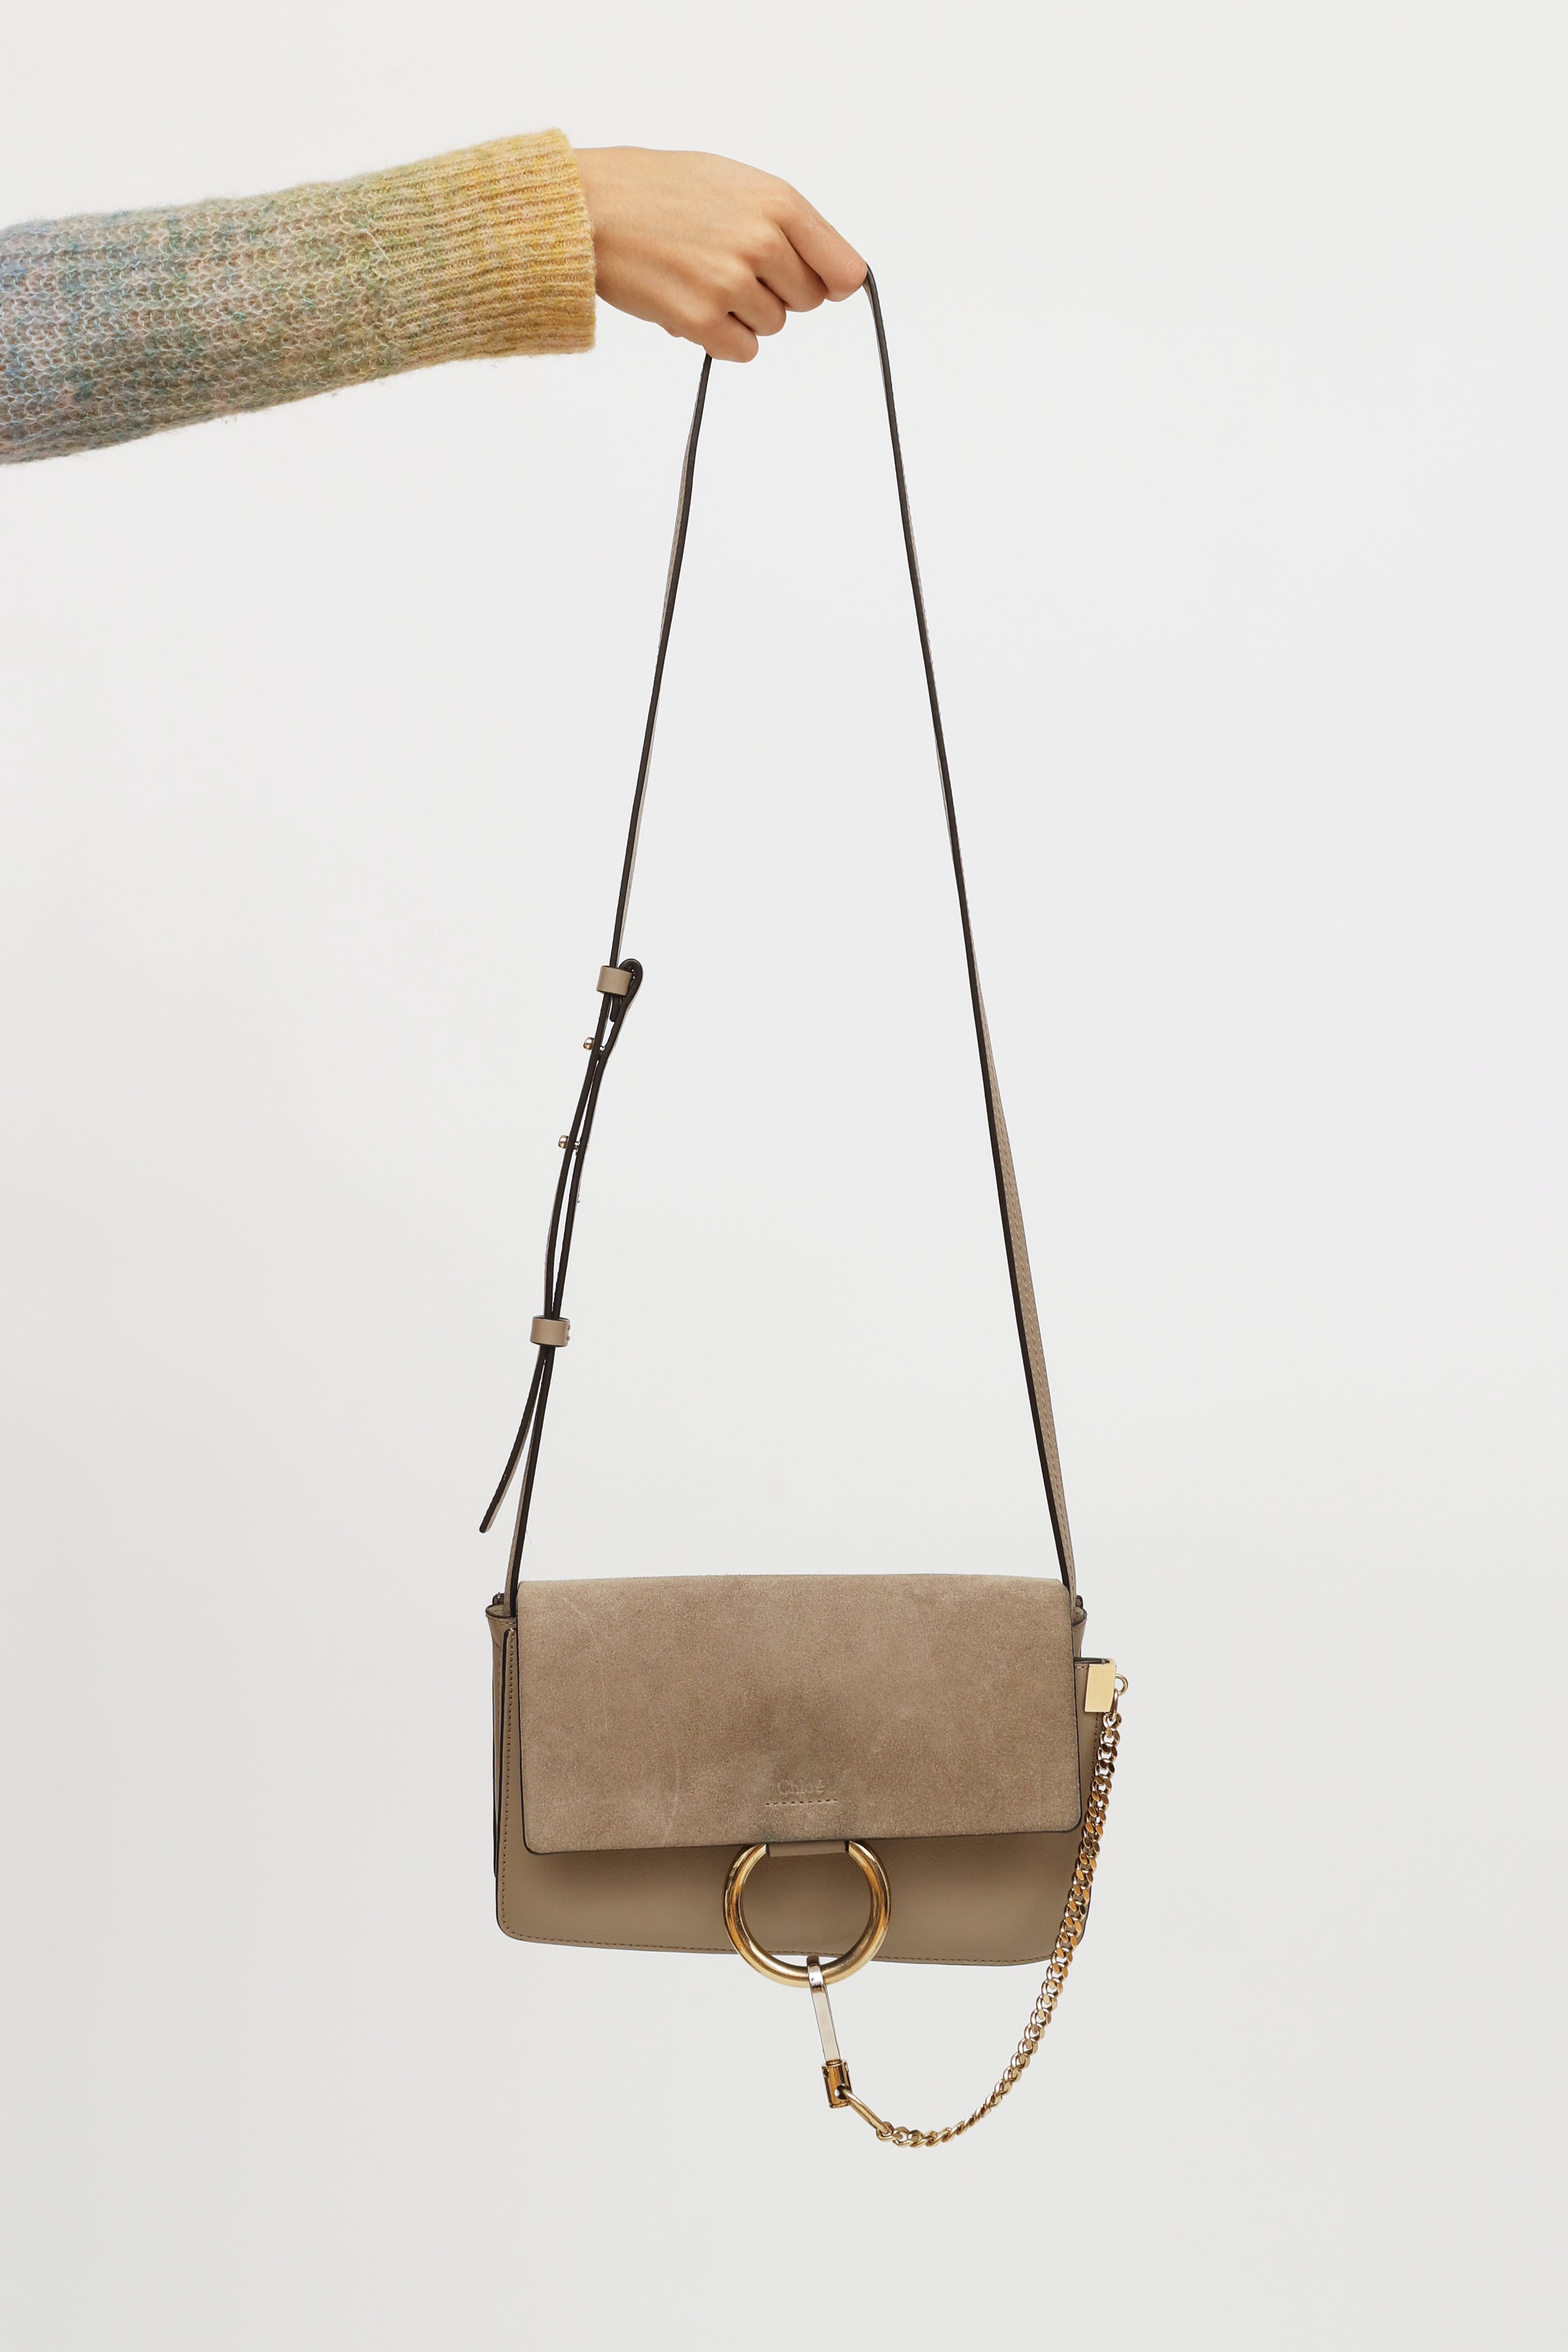 Chloé Small Faye Soft Top Handle Tote Bag in Brown